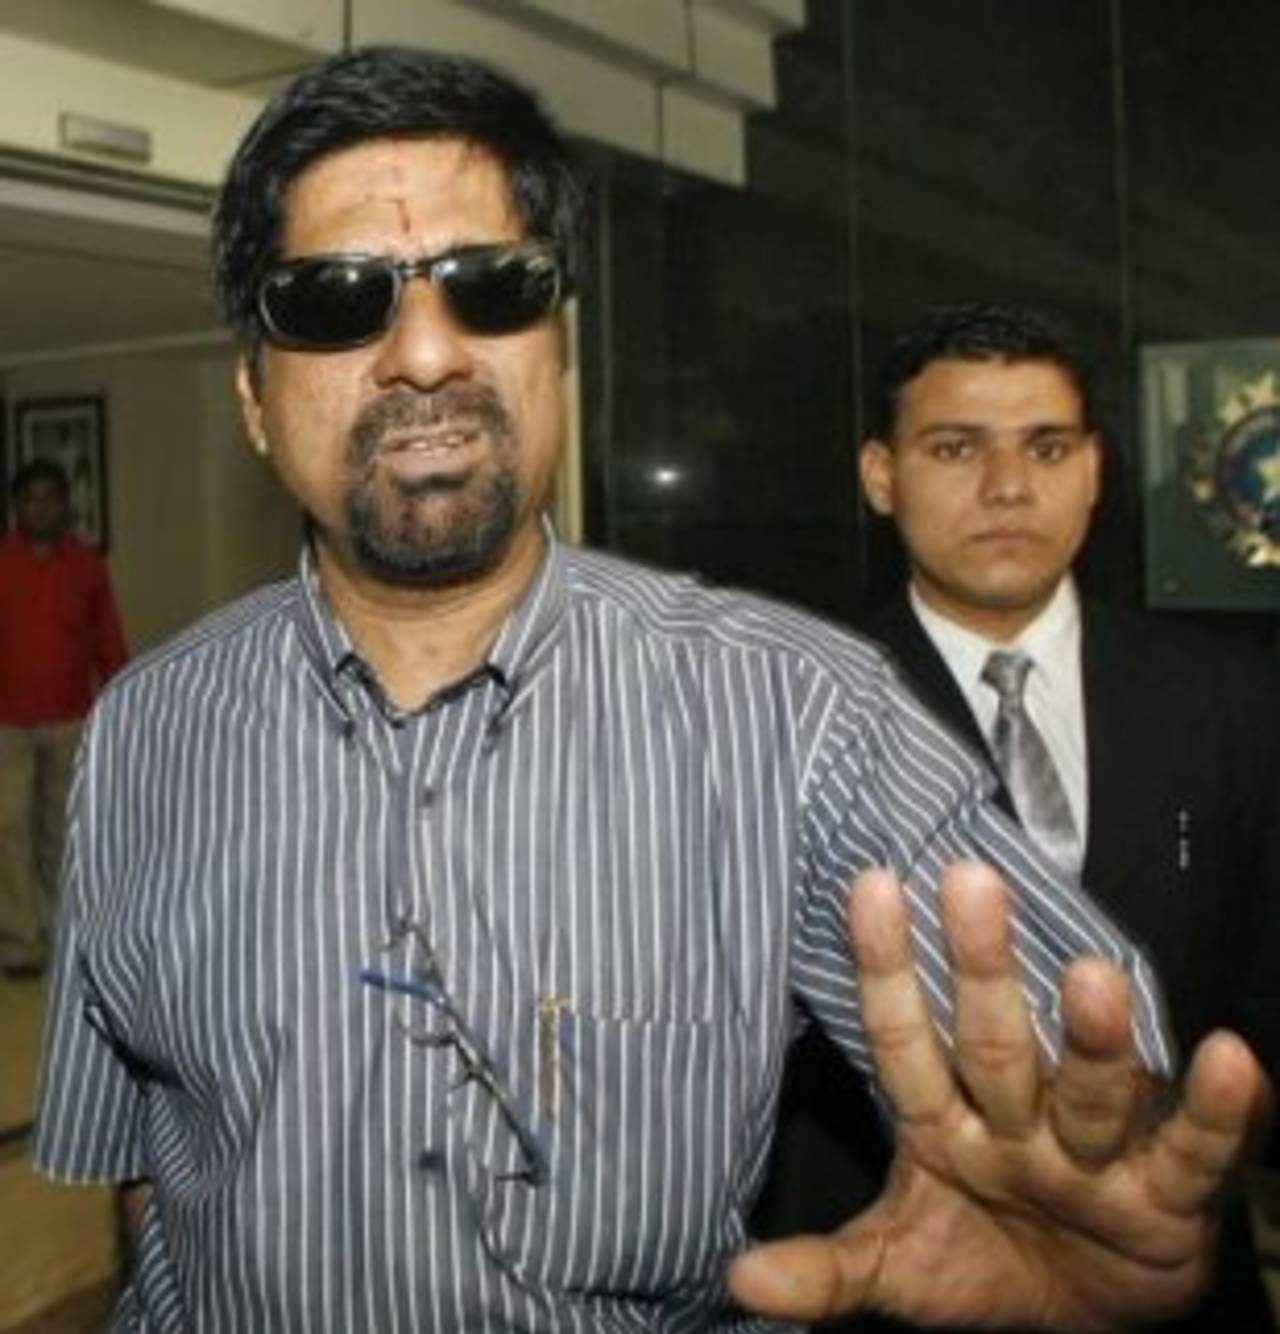 Kris Srikkanth, India's chairman of selectors, attends his first selection meeting, Mumbai, October 1, 2008